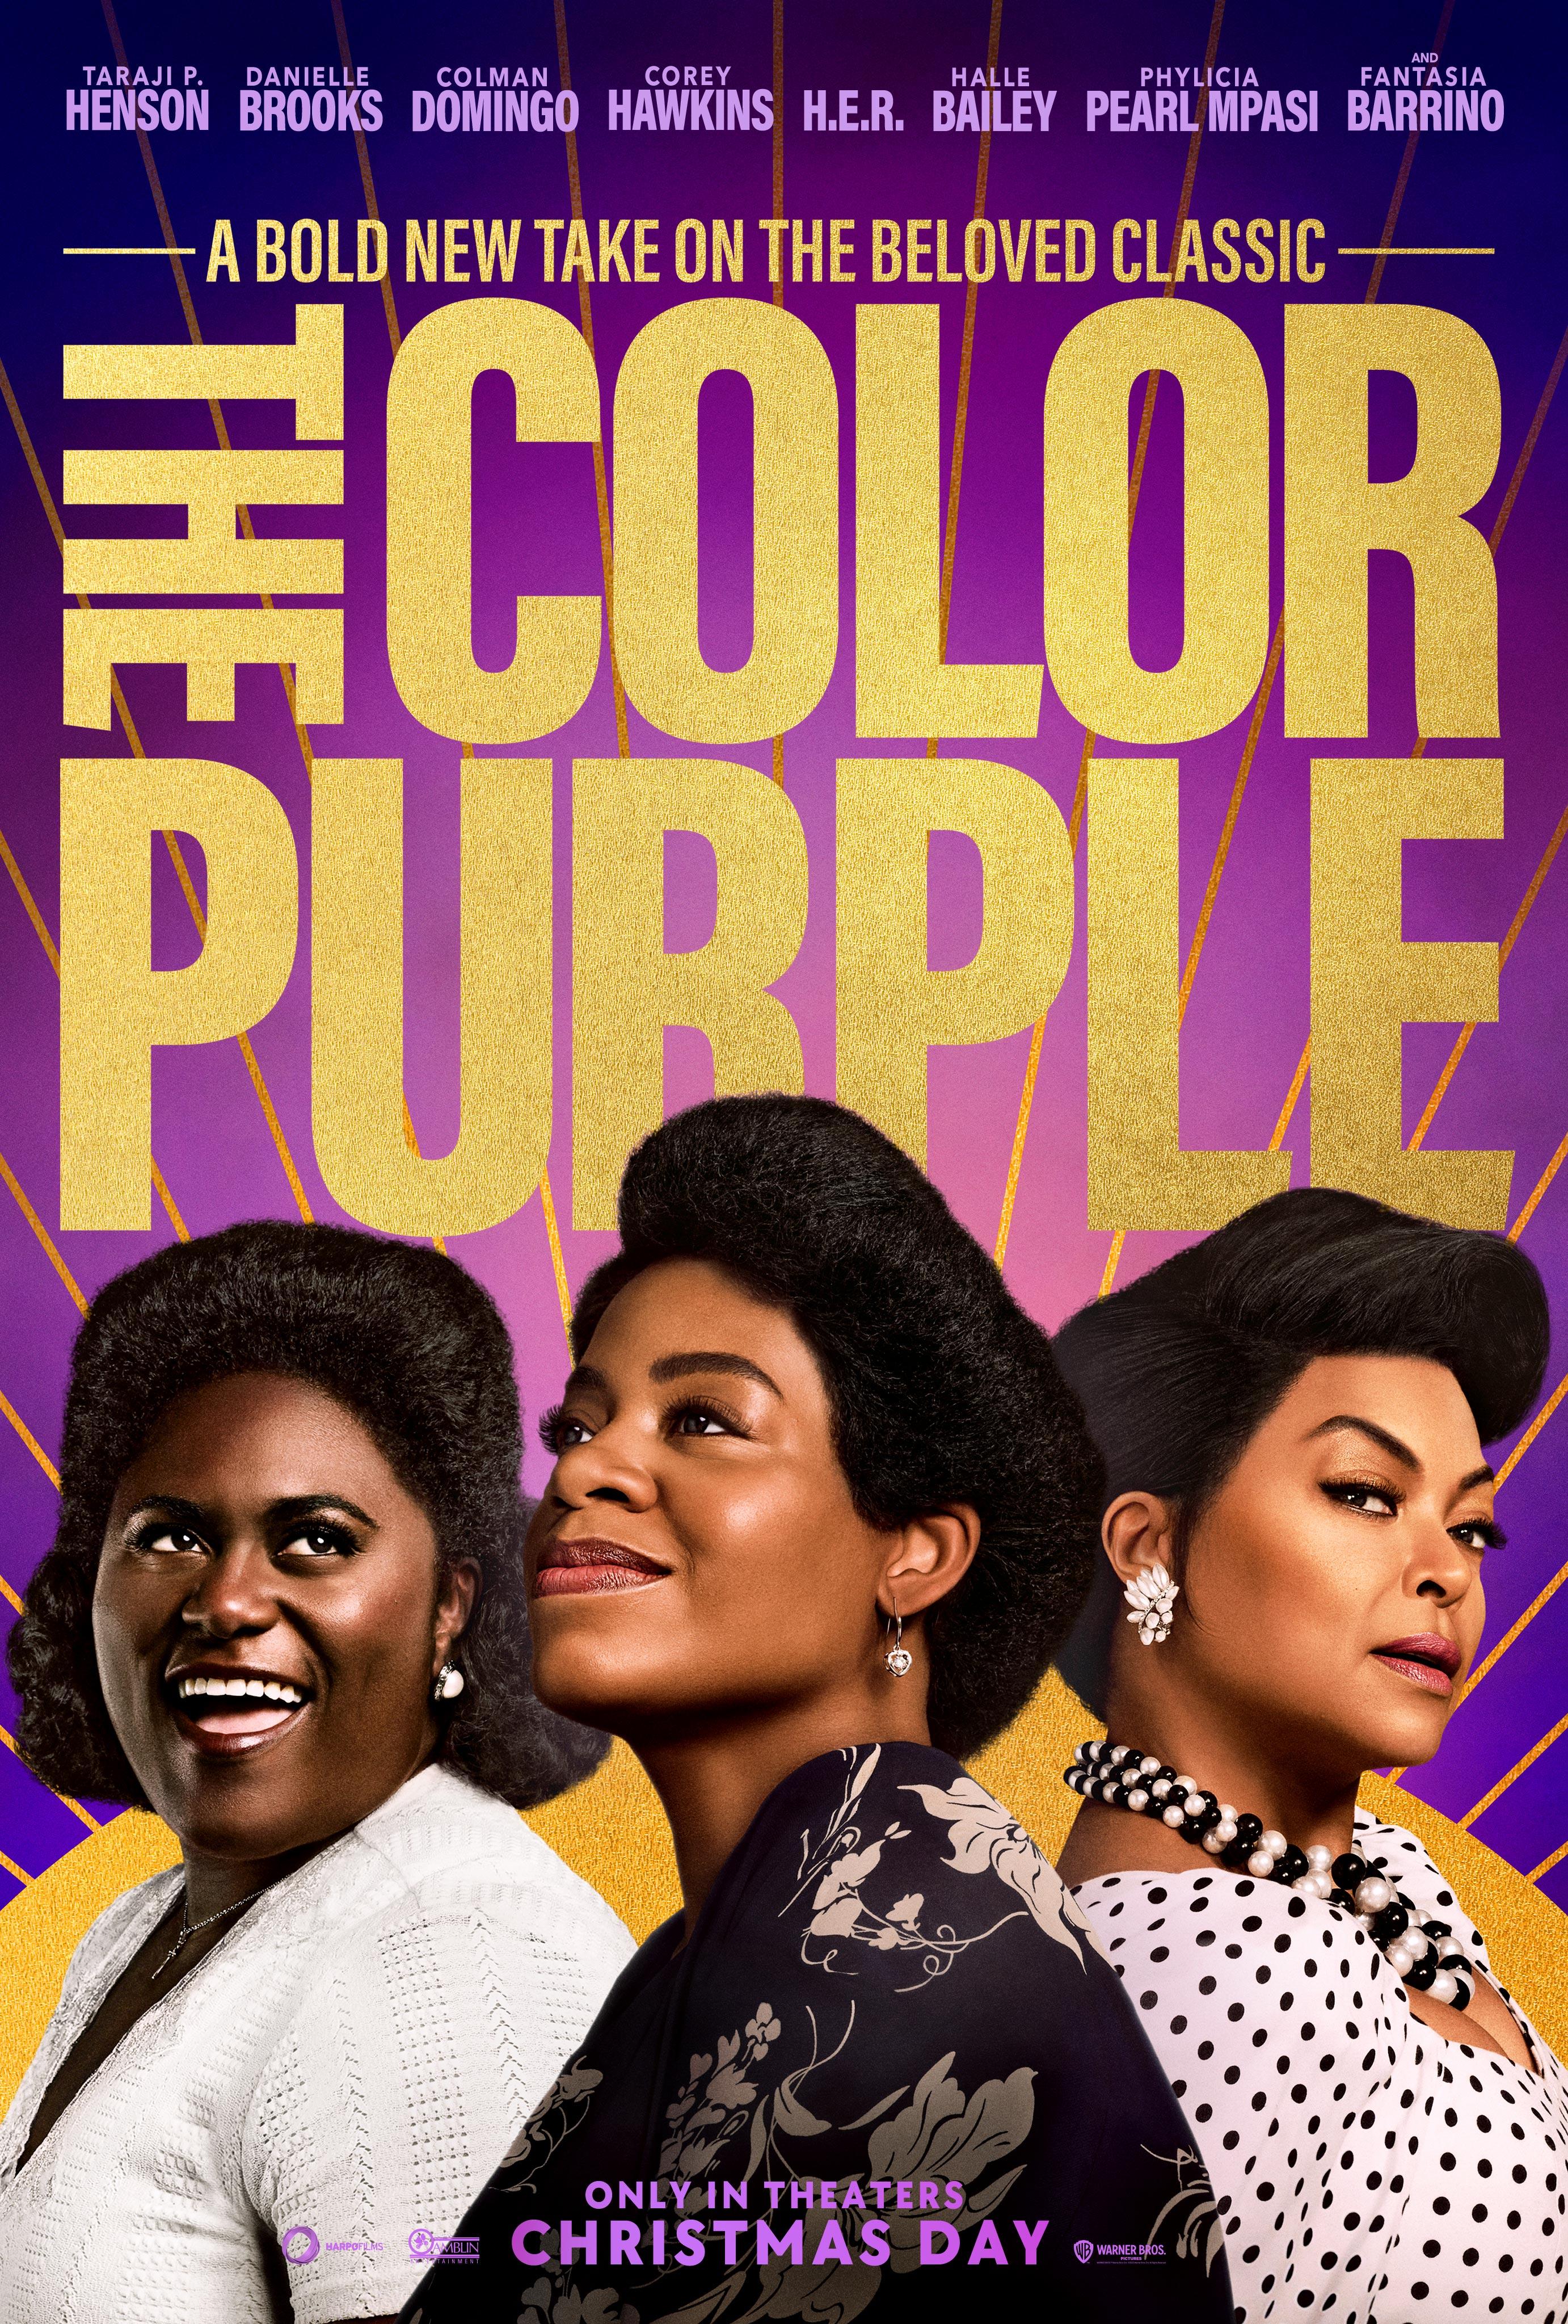 Cover Art for "The Color Purple"